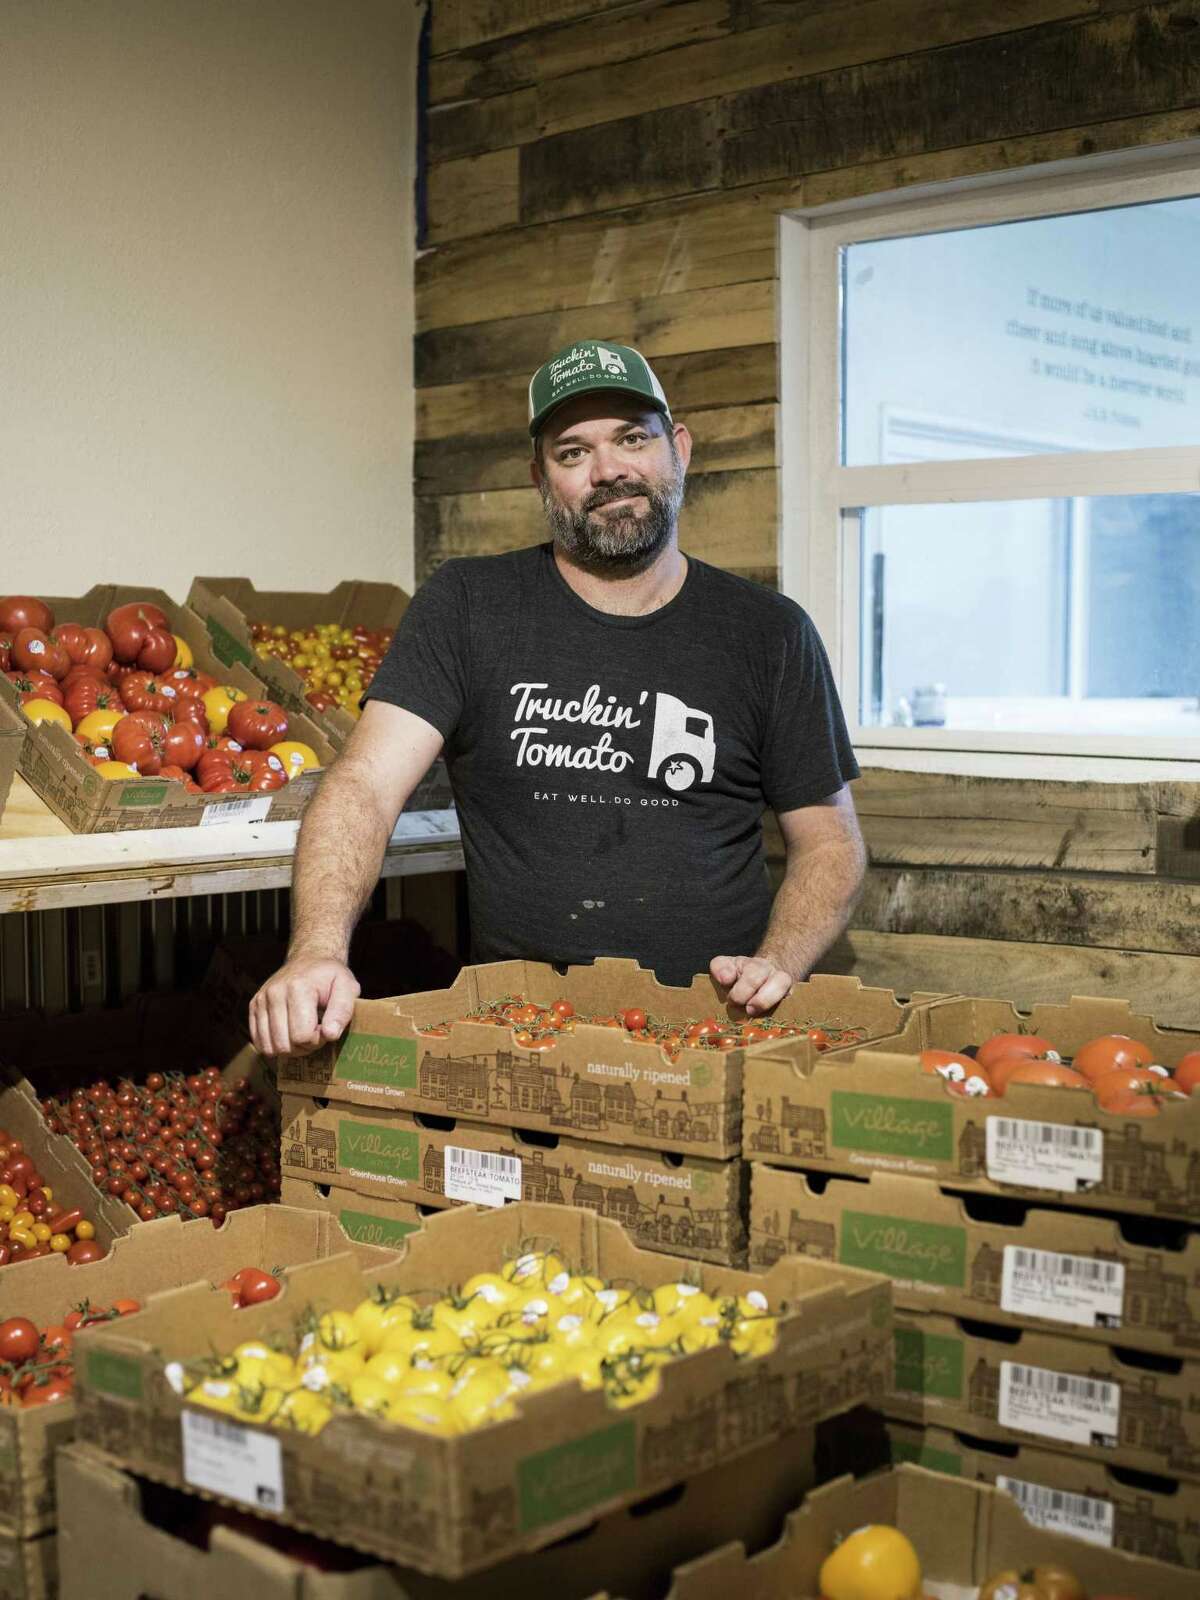 Bryan Pape of Trukin' Tomato poses for a portrait along with his produce for sale during the midweek market.